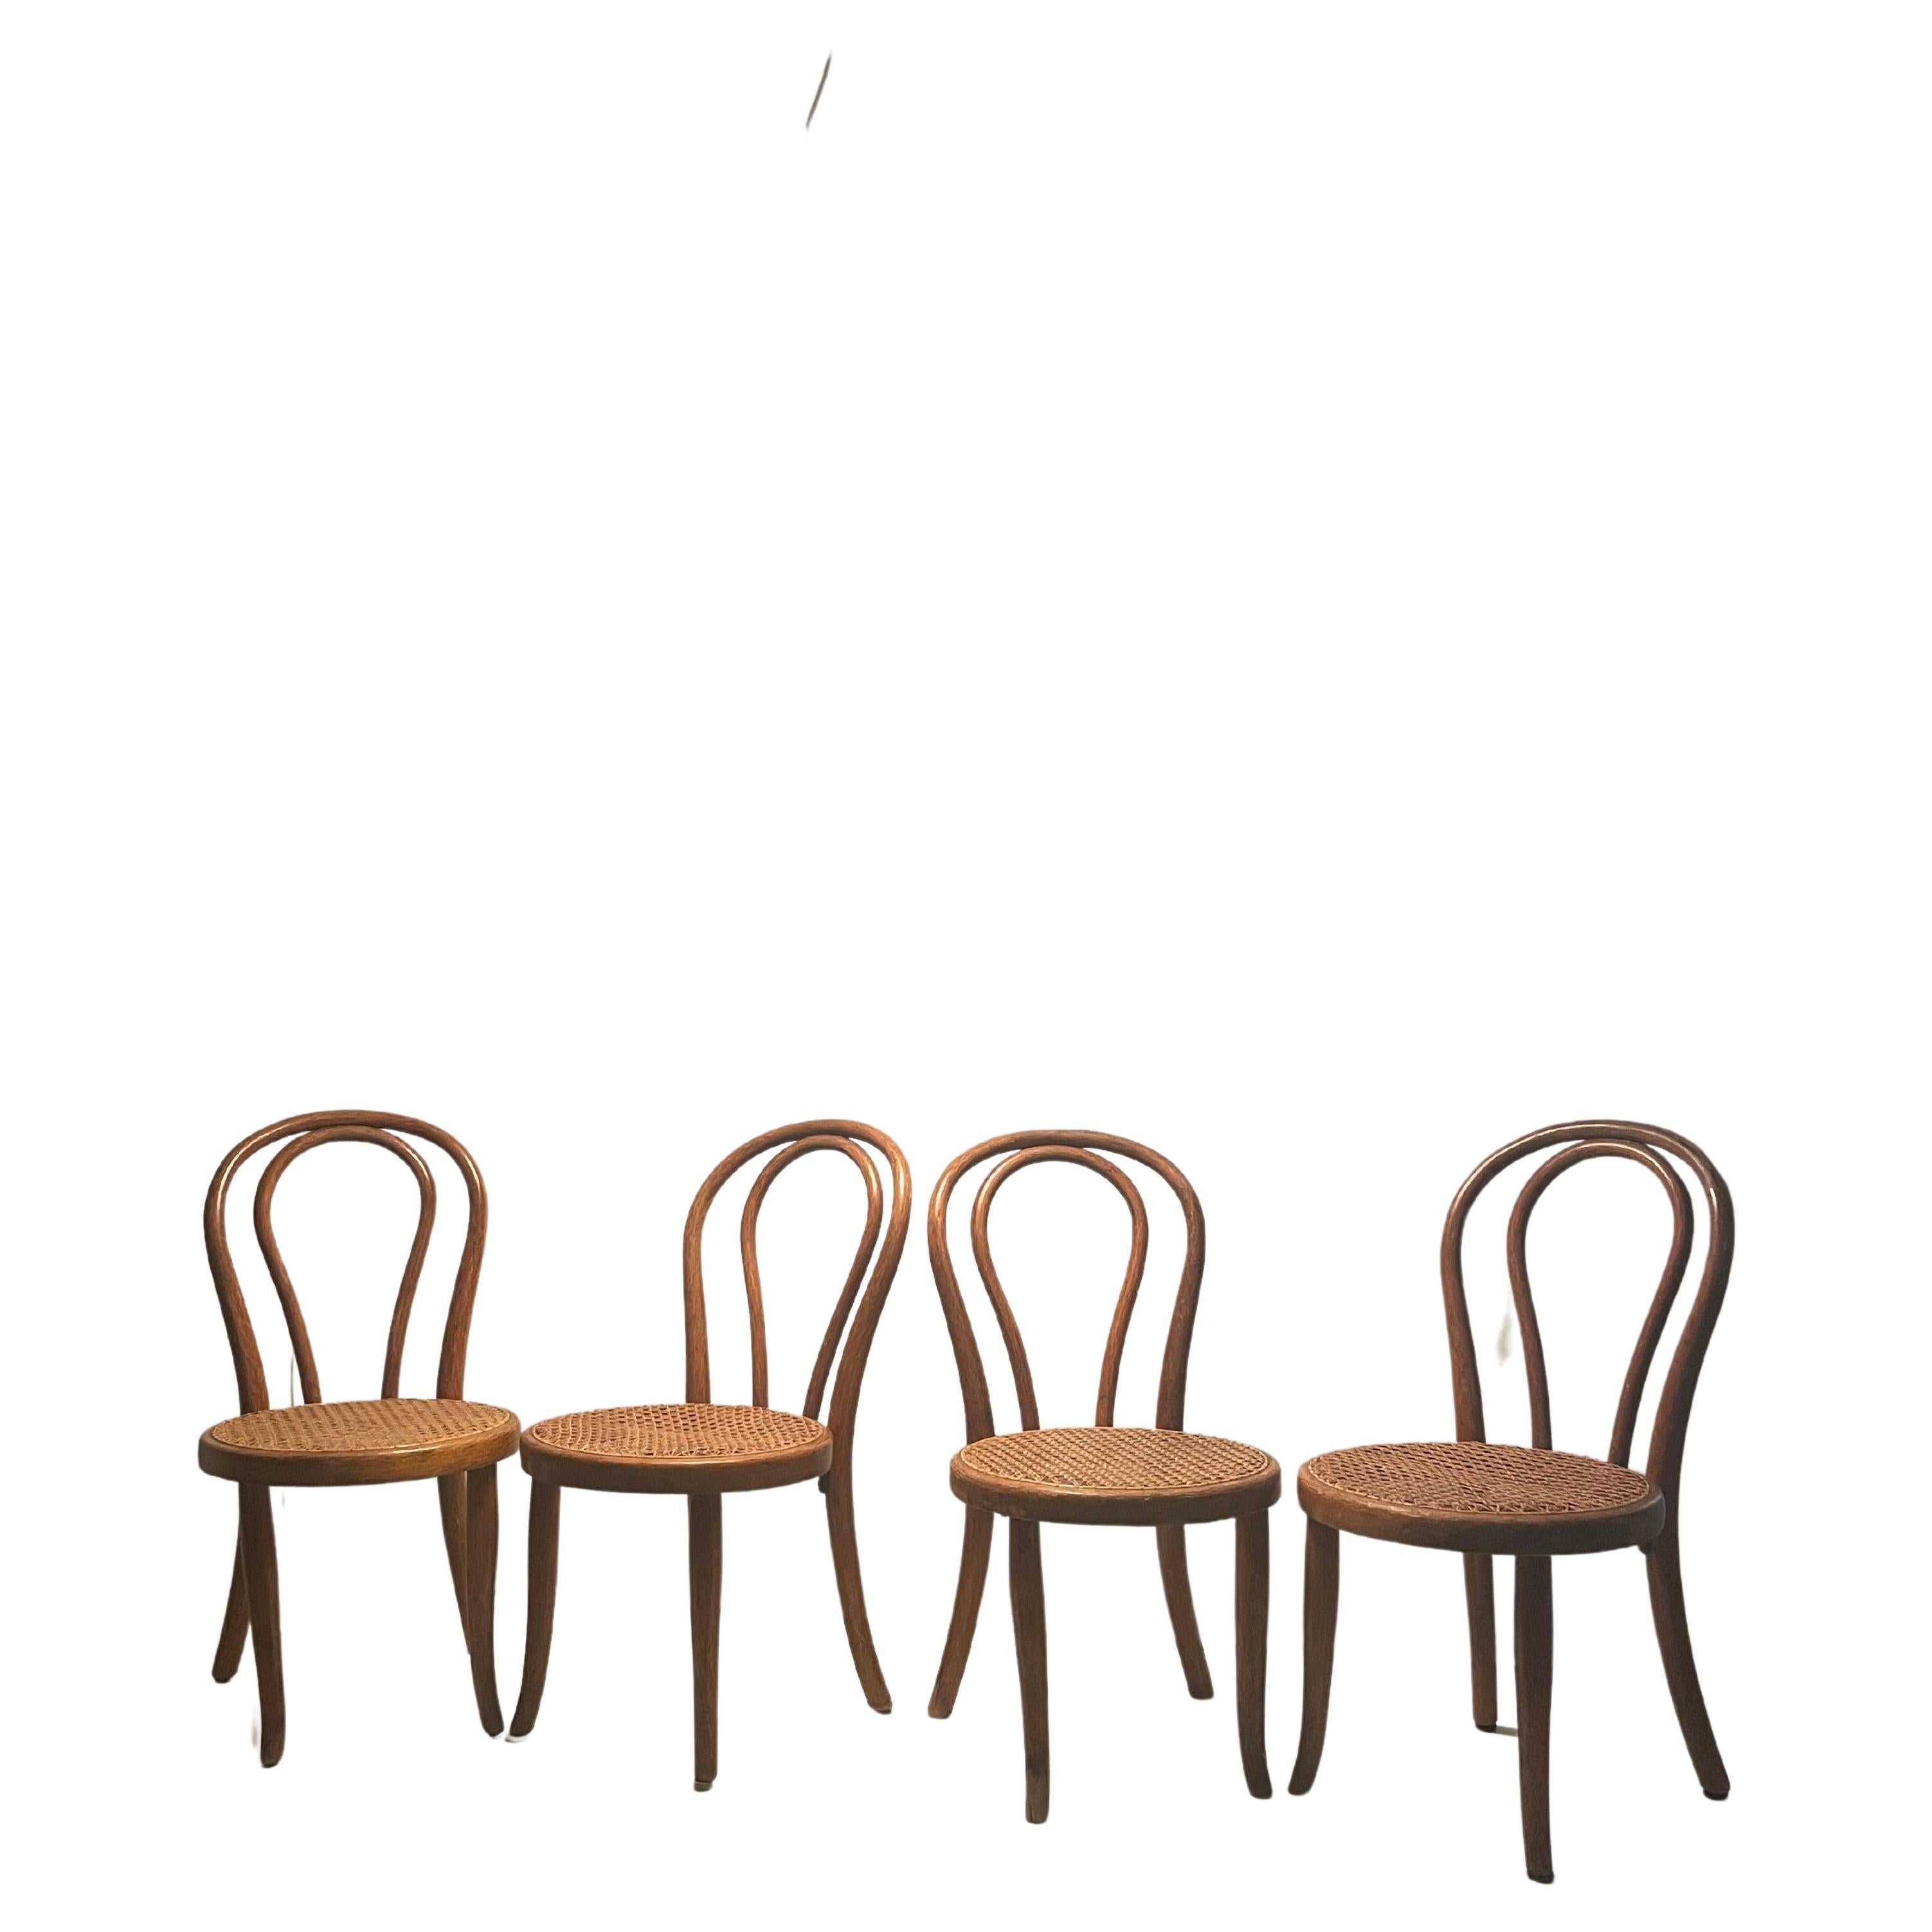 Set of Four Thonet Bentwood and Cane Children’s Chairs